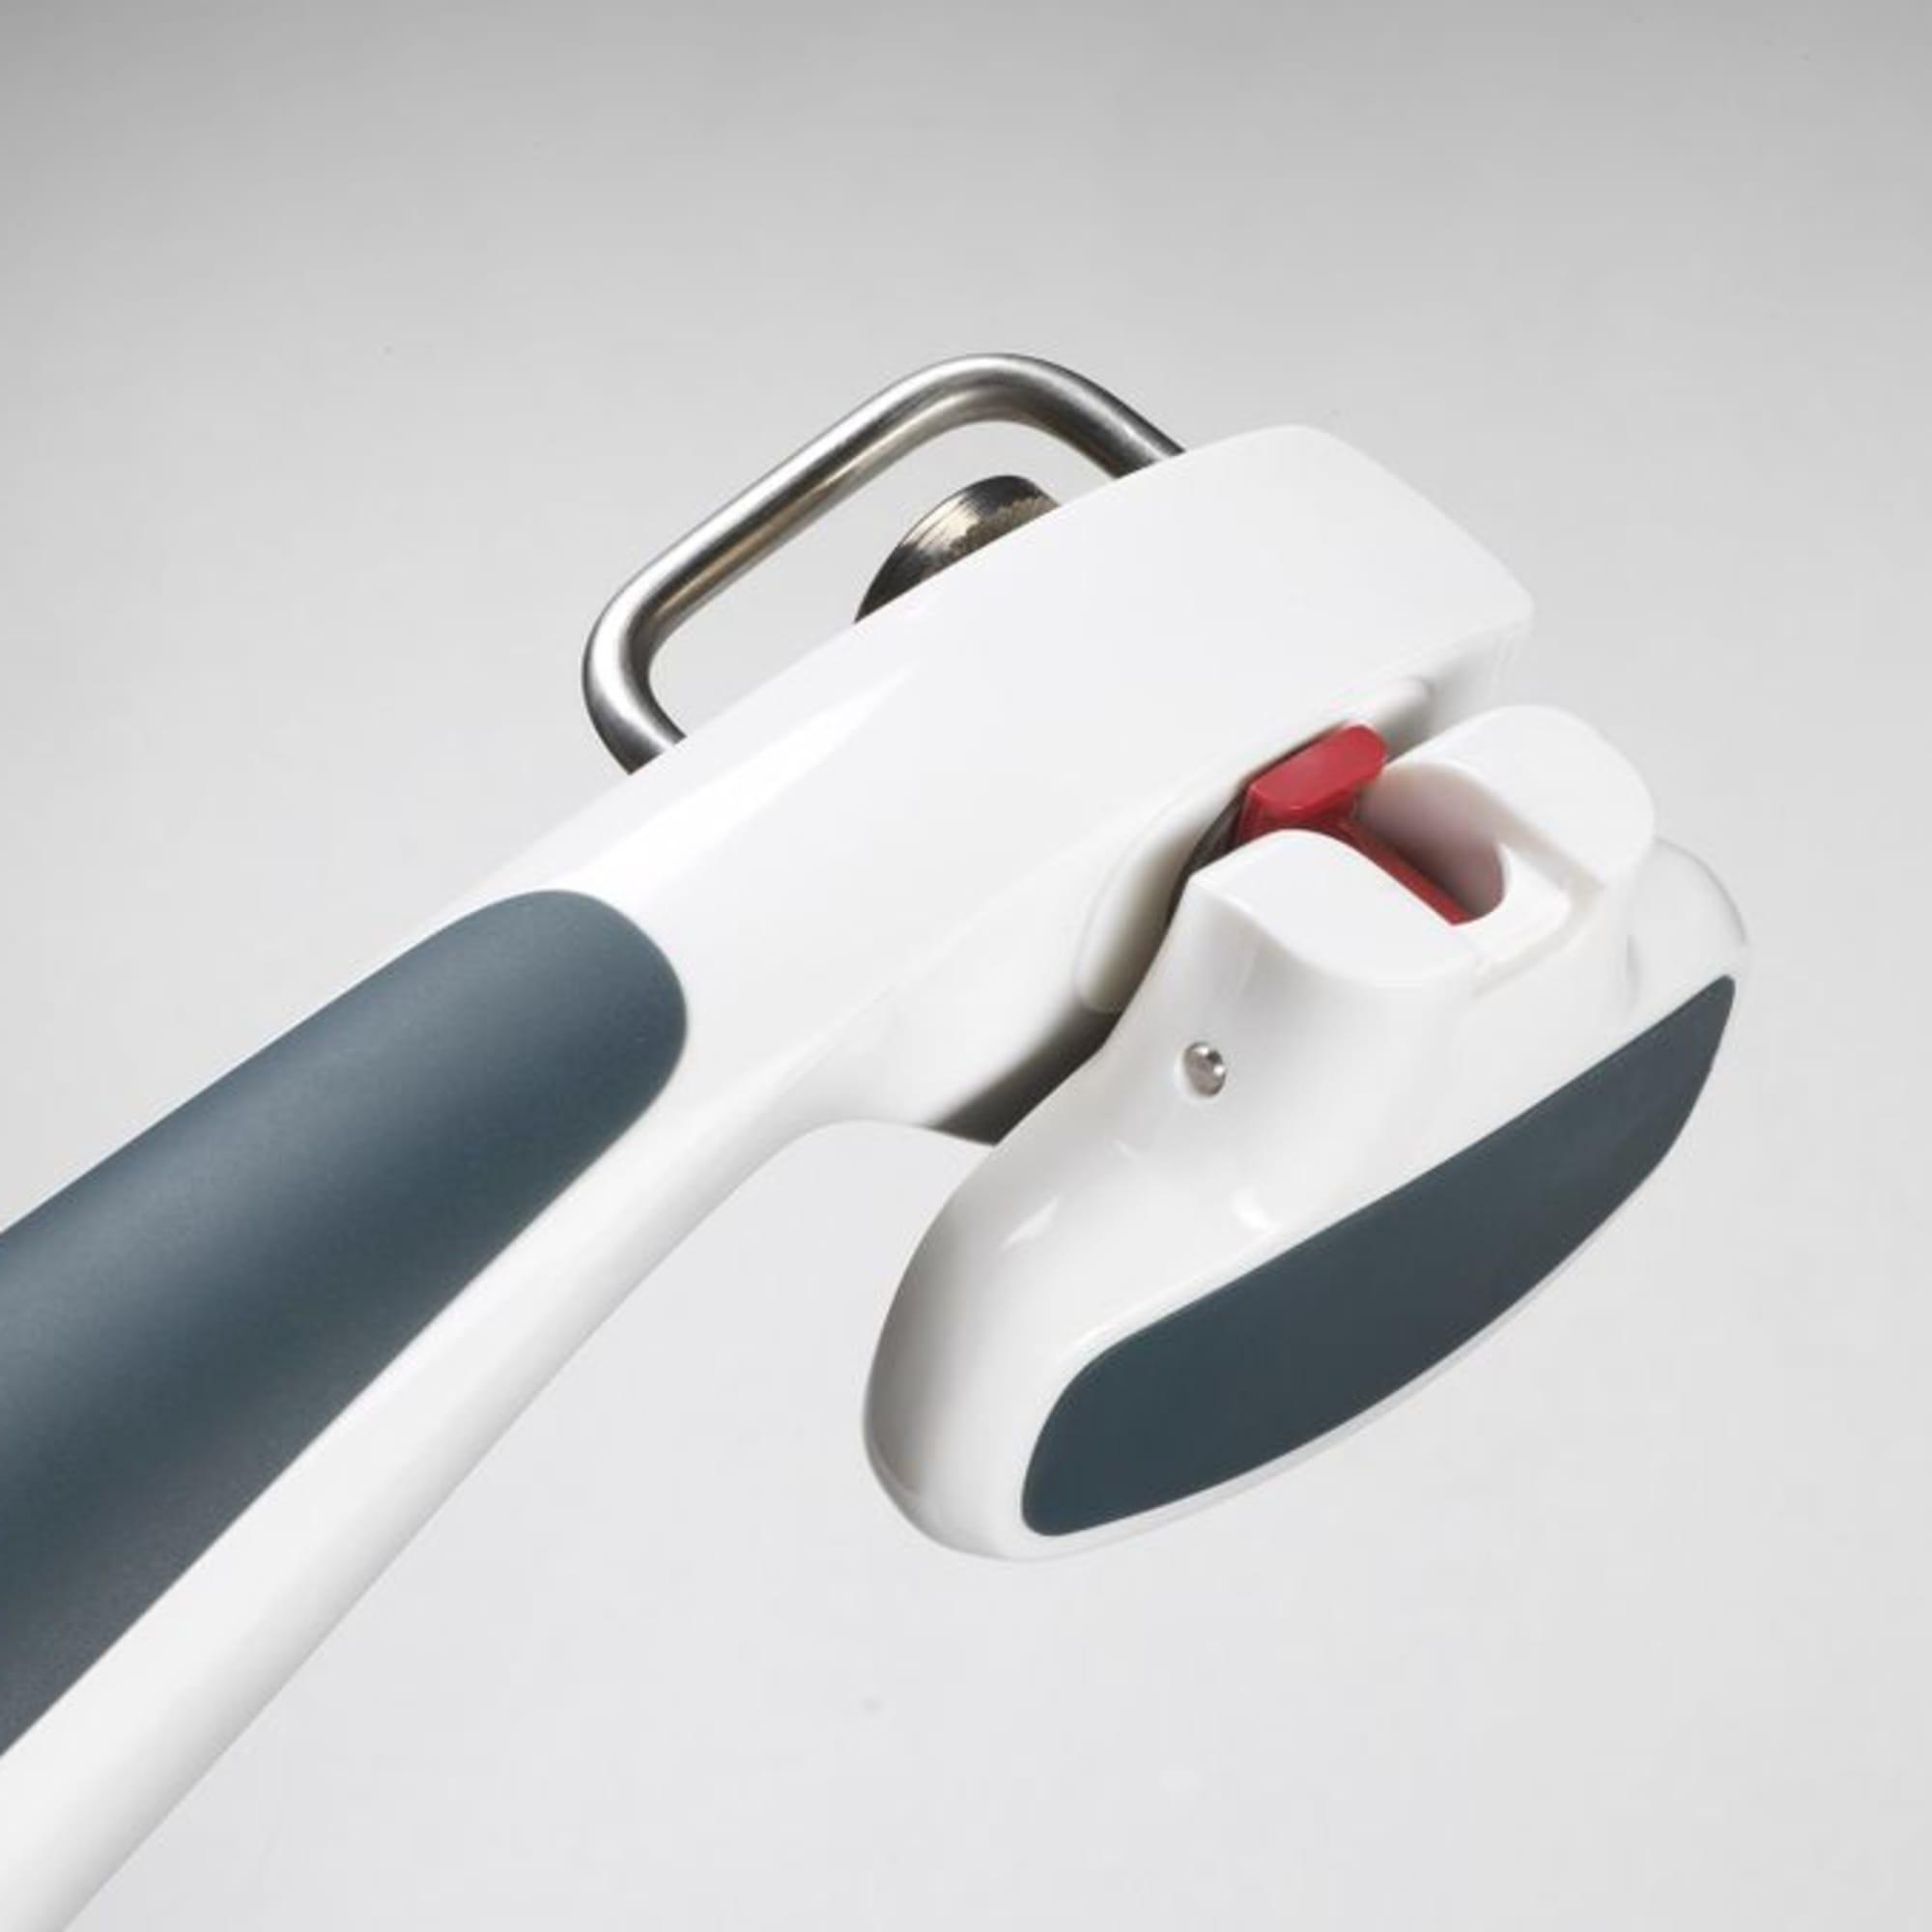 Zyliss Safe Edge Can Opener Image 6